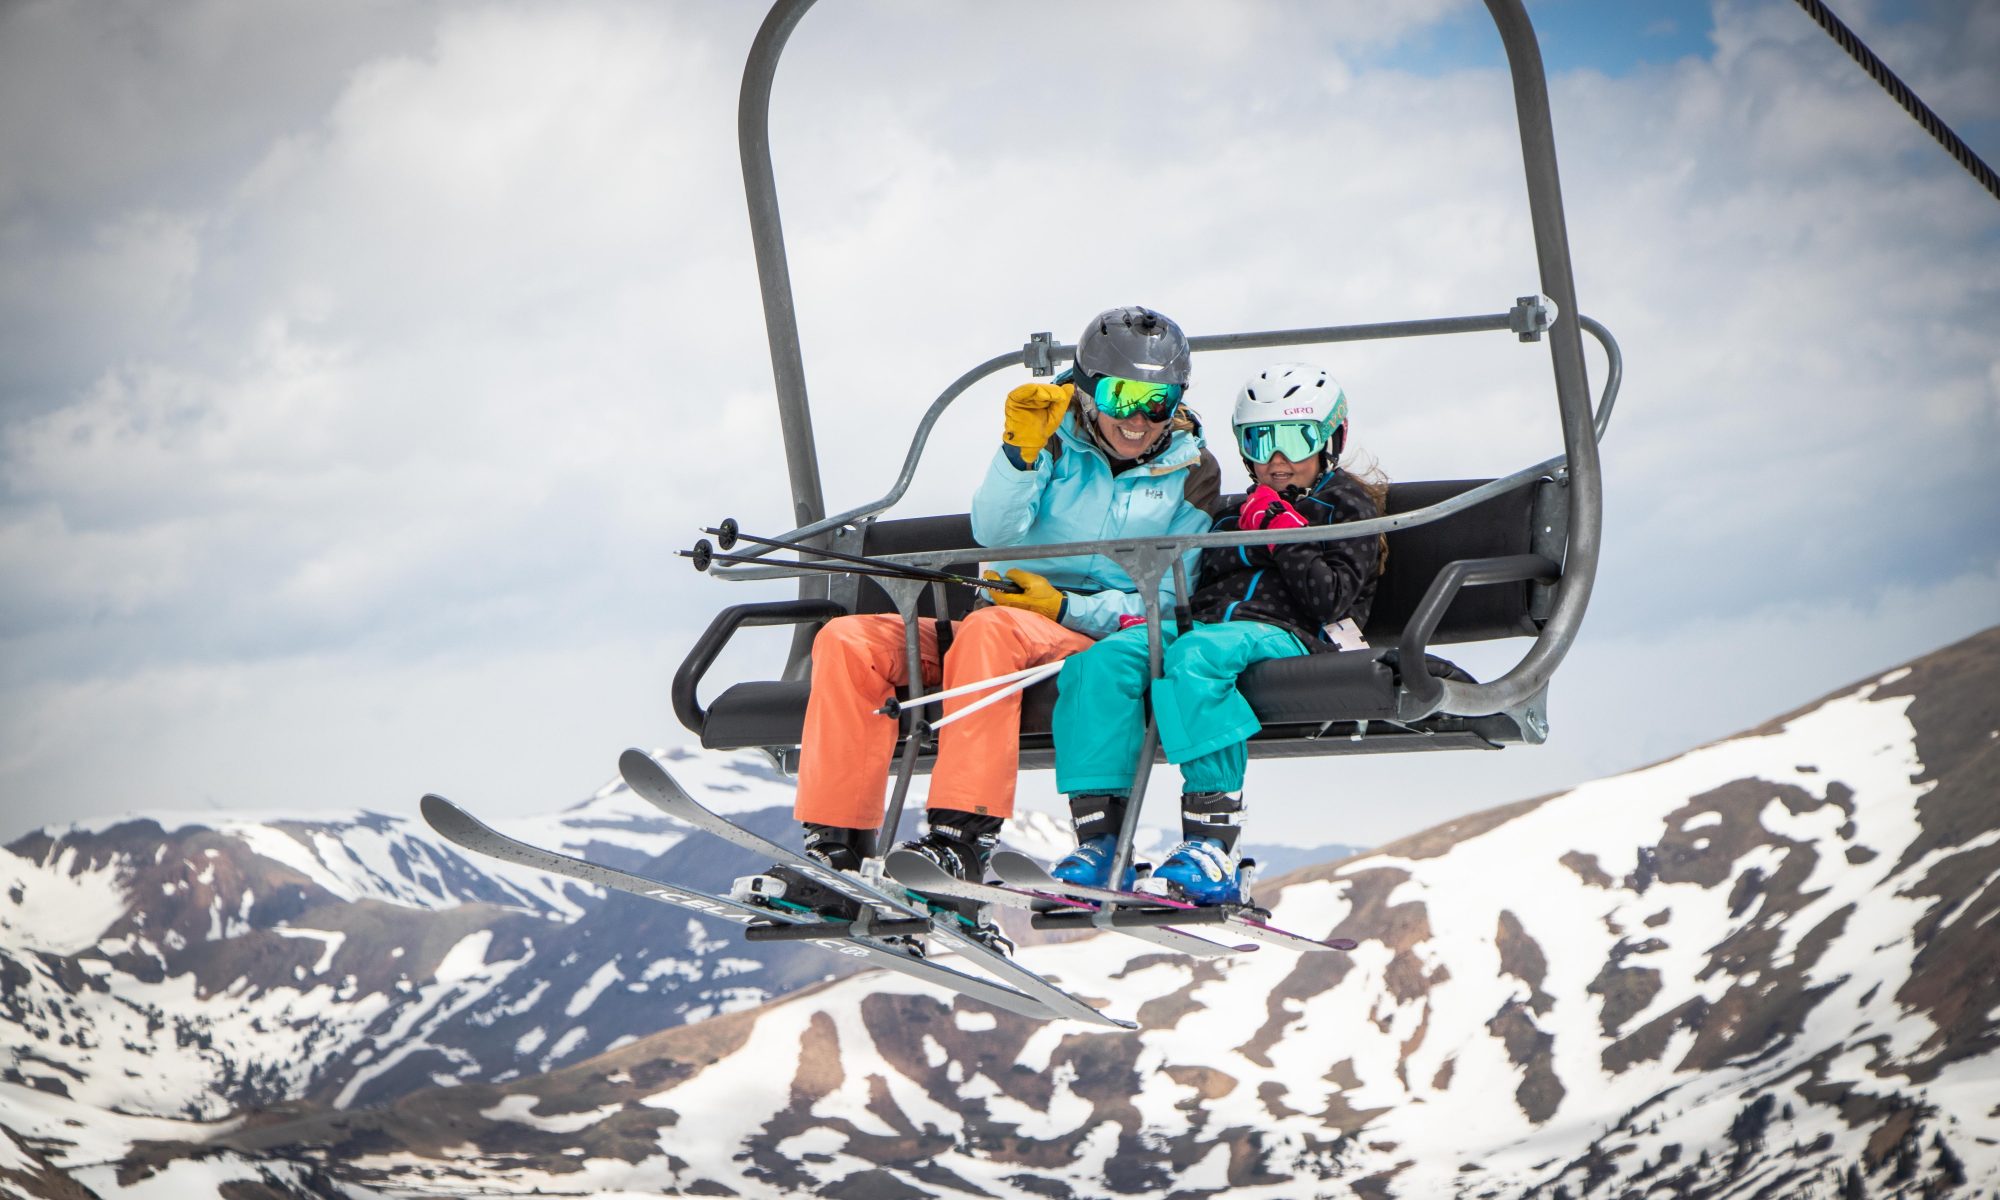 Solstice Skiing at Arapahoe Basin. Photo: Arapahoe Basin Resort. How can we envision ski resorts opening with social distancing for the 2020-21 ski season?